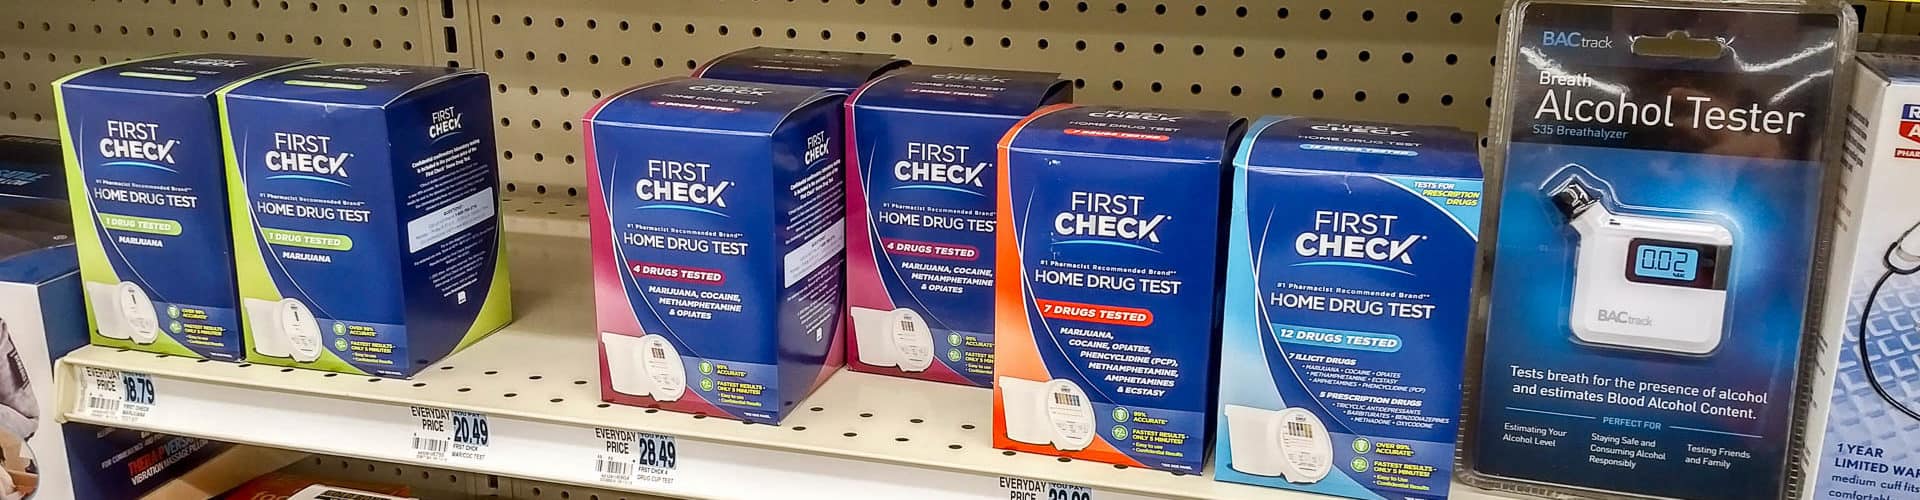 First Check Home Drug Test COVER Rite Aid